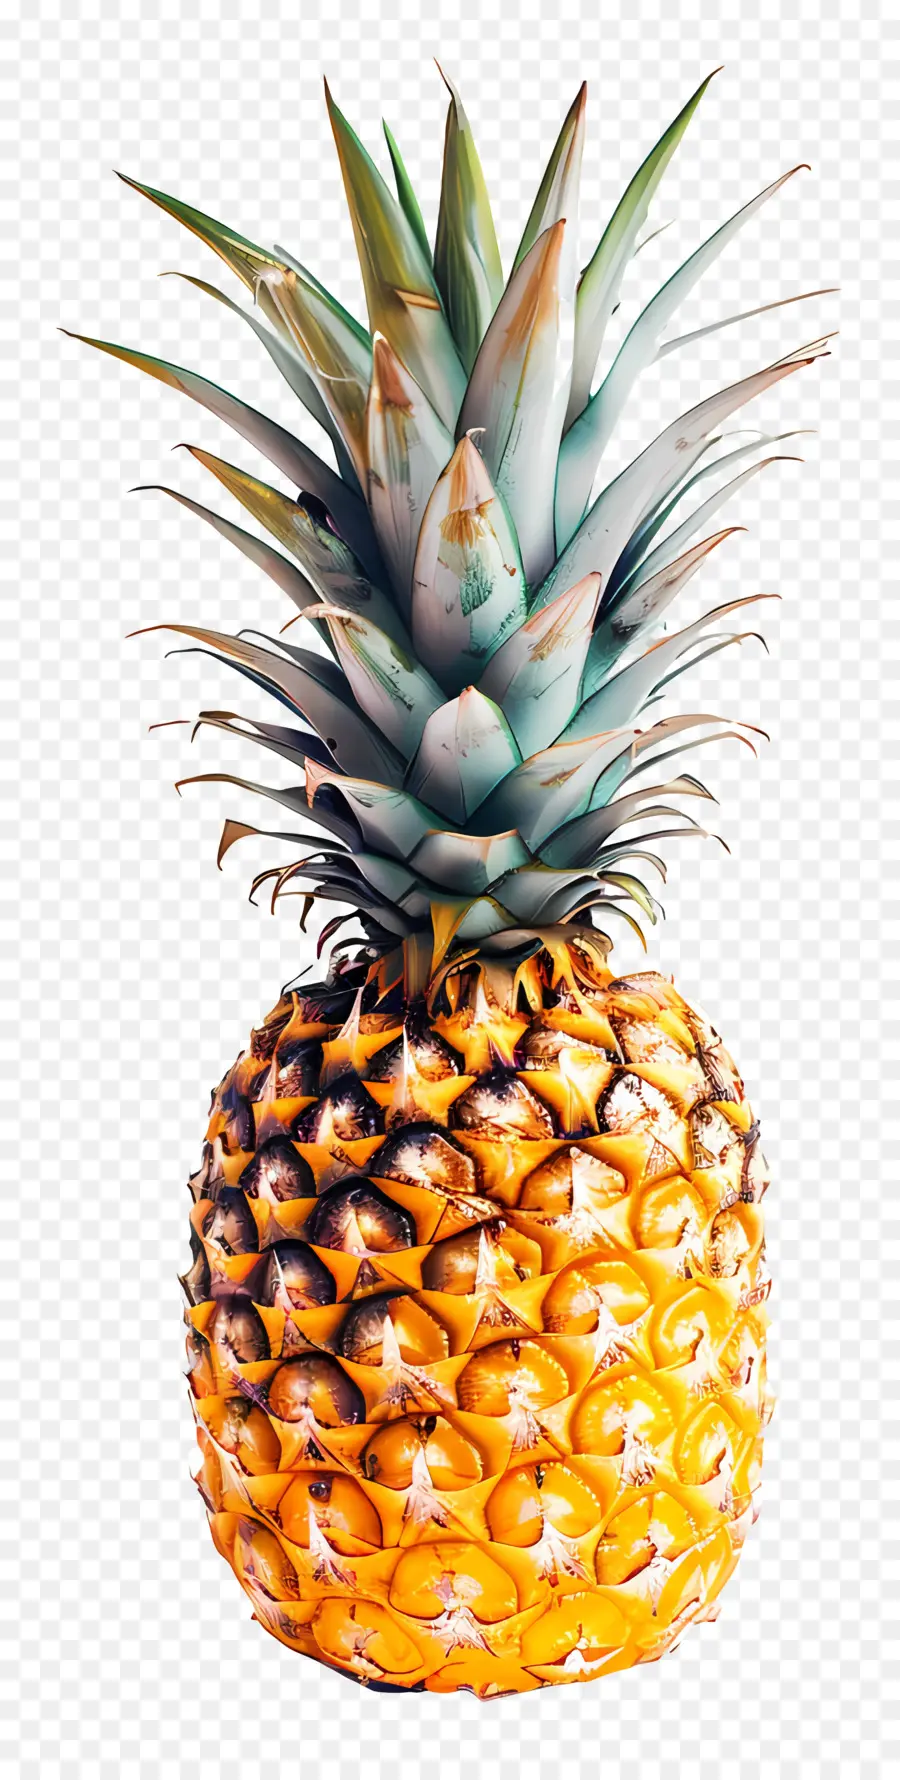 L'ananas，Or PNG